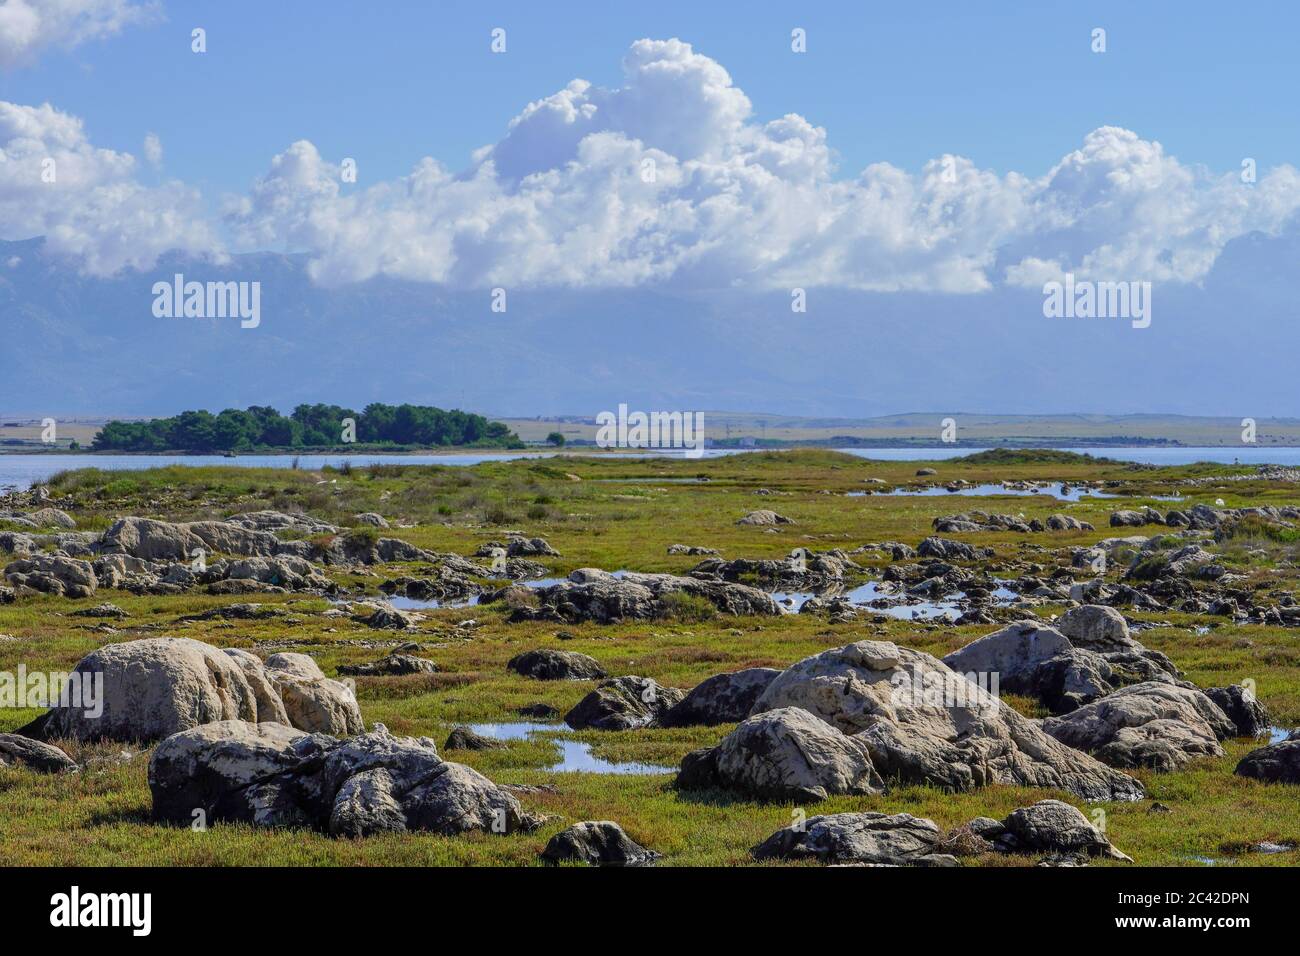 The sea shore with a large rock in the foreground, a skeleton background and a blue sky with clouds Stock Photo